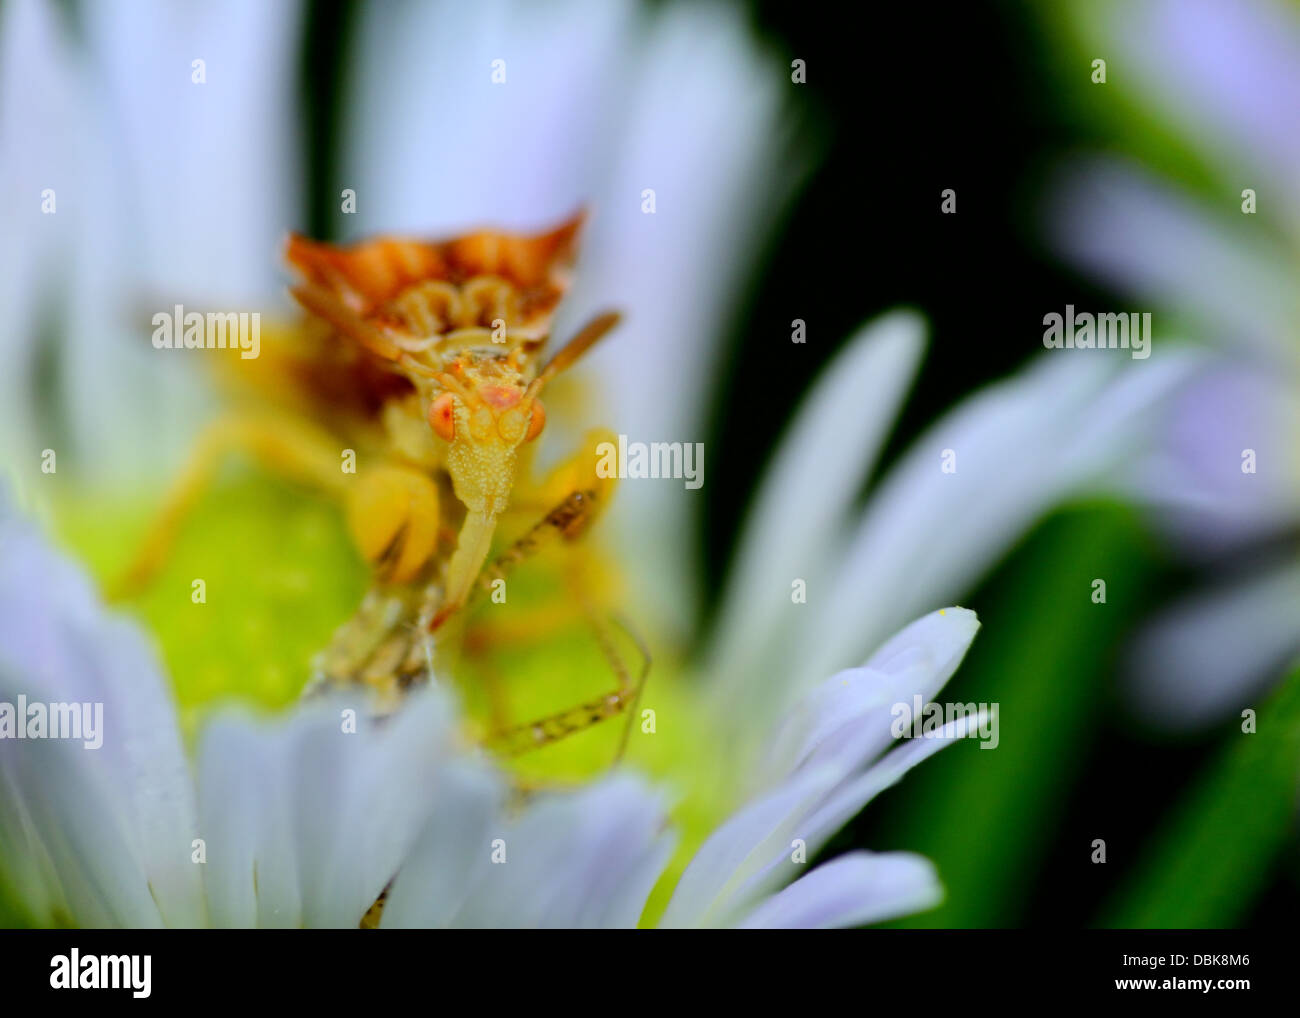 An Ambush Bug perched on a flower eating prey. Stock Photo